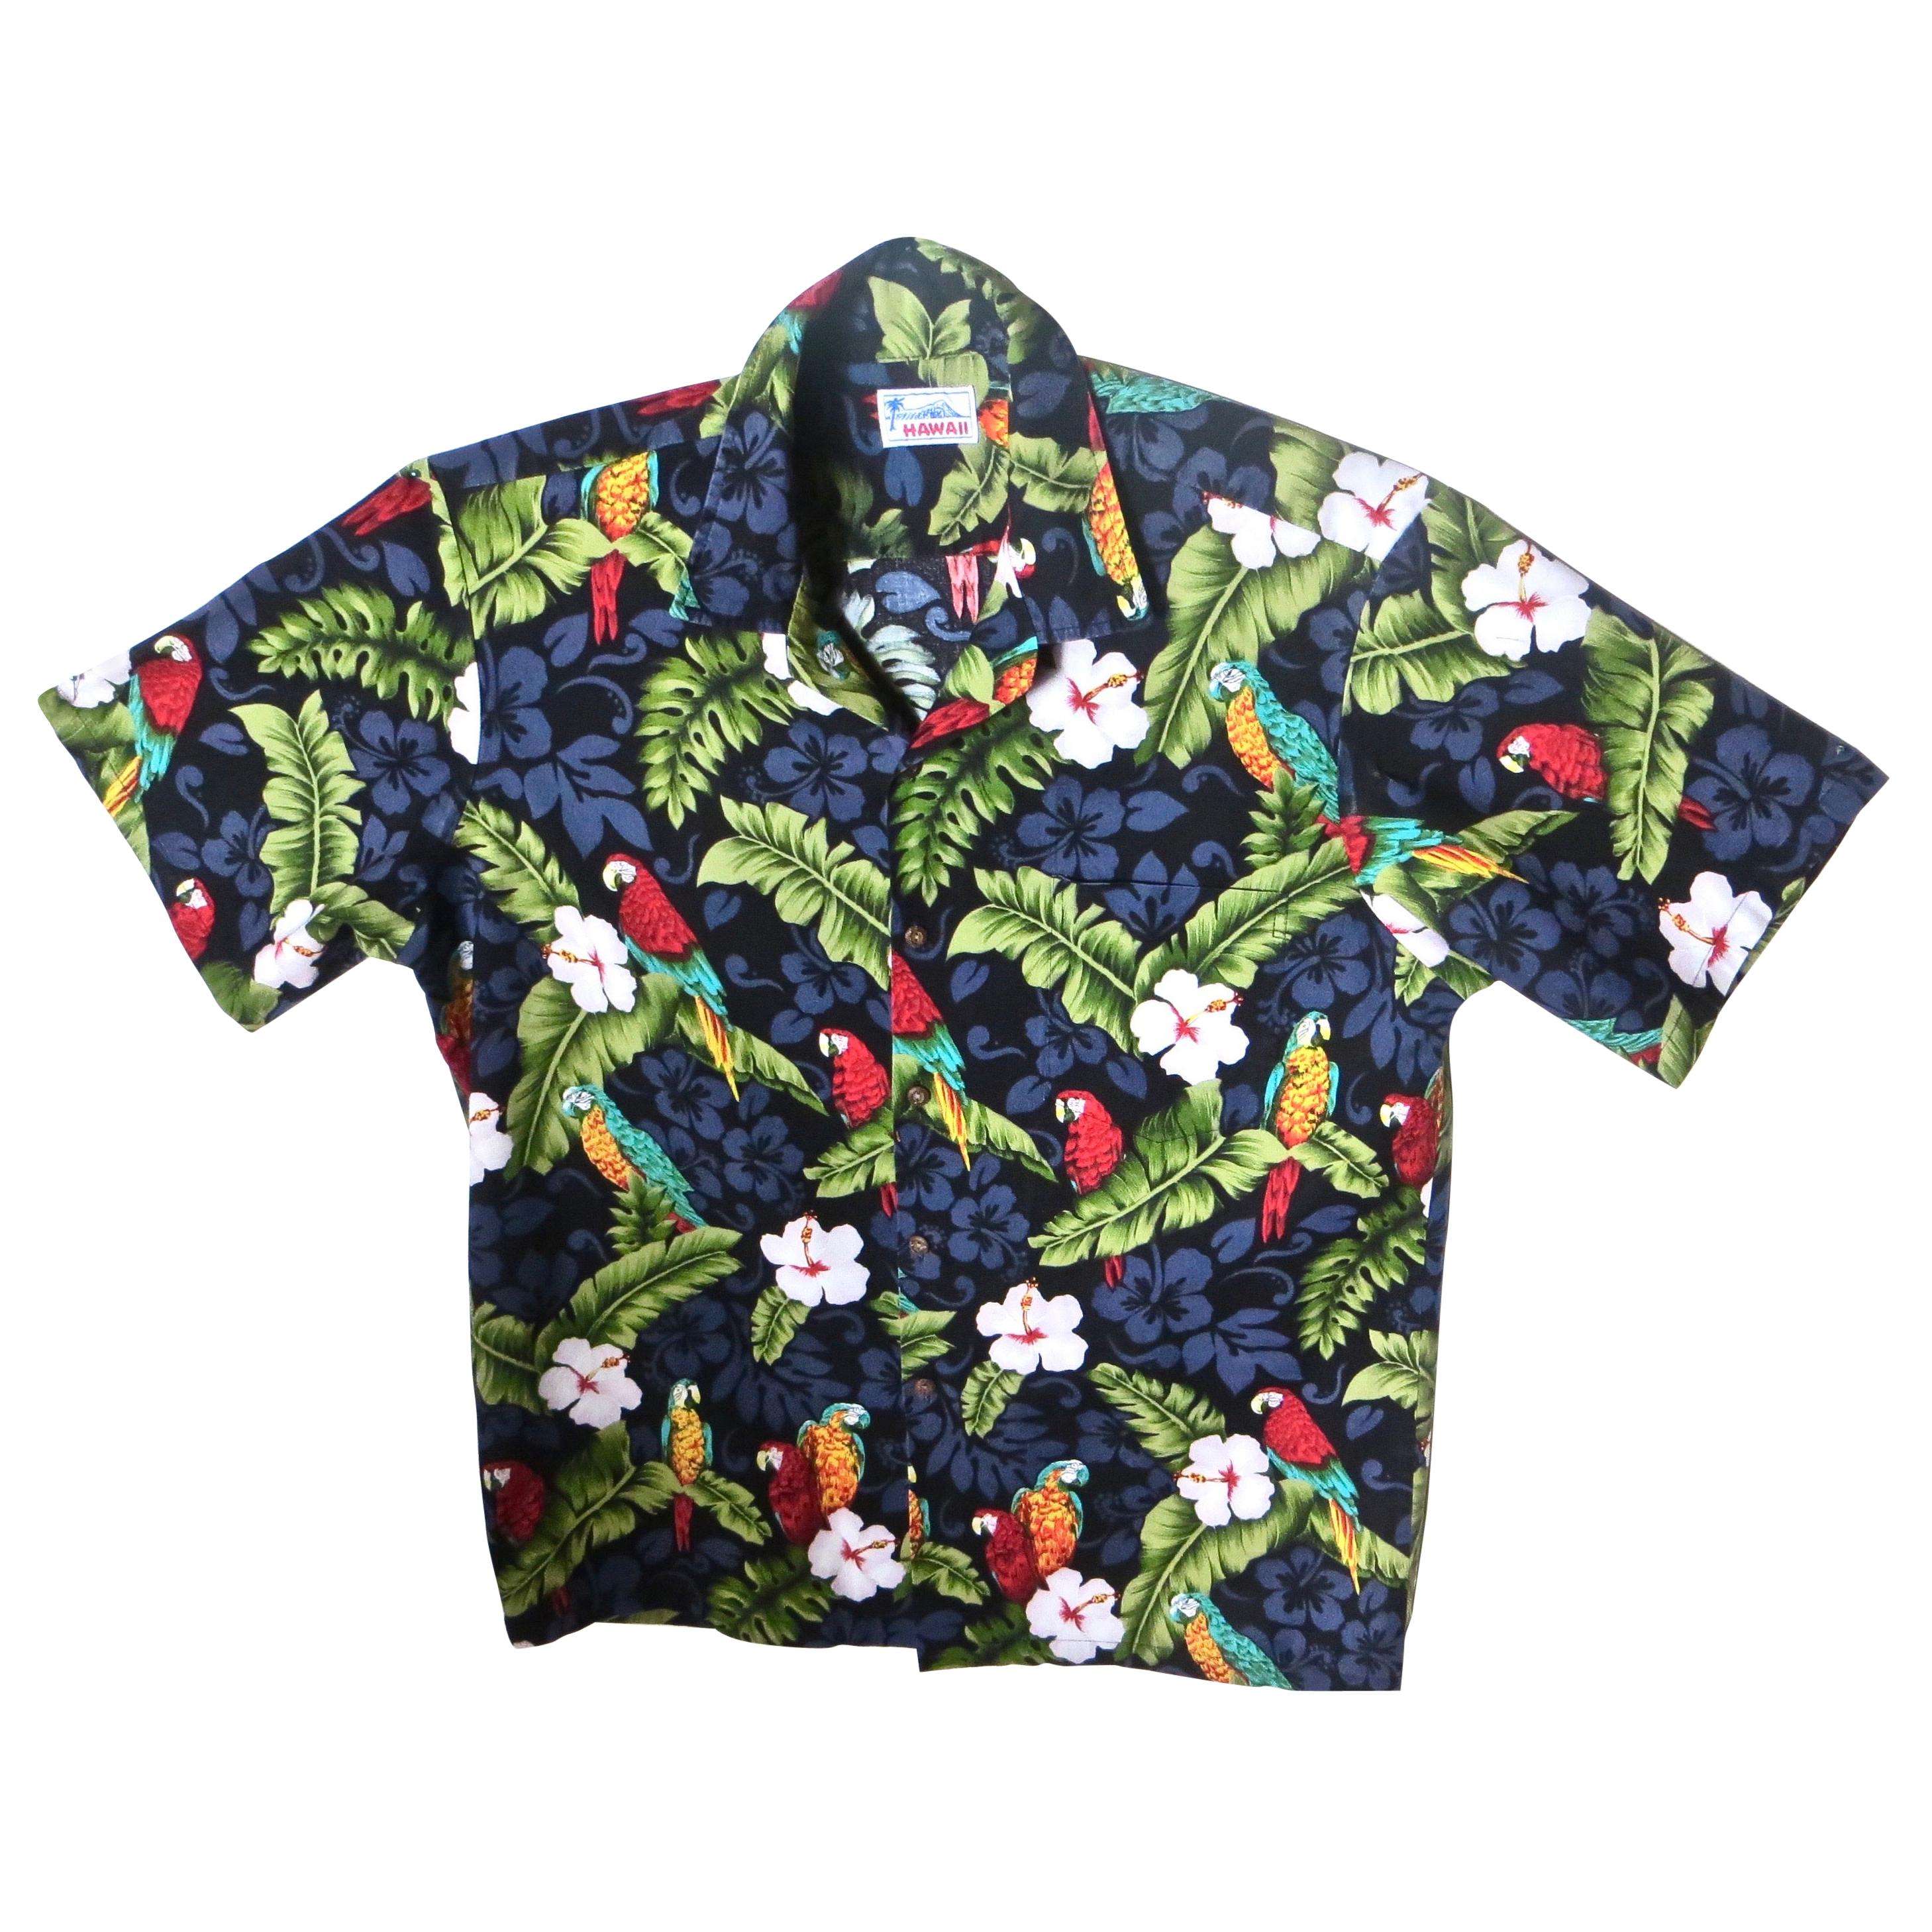 Vintage Hawaiian Shirt, Parrot and Floral Design, Men's X-Large, Circa 1970's For Sale